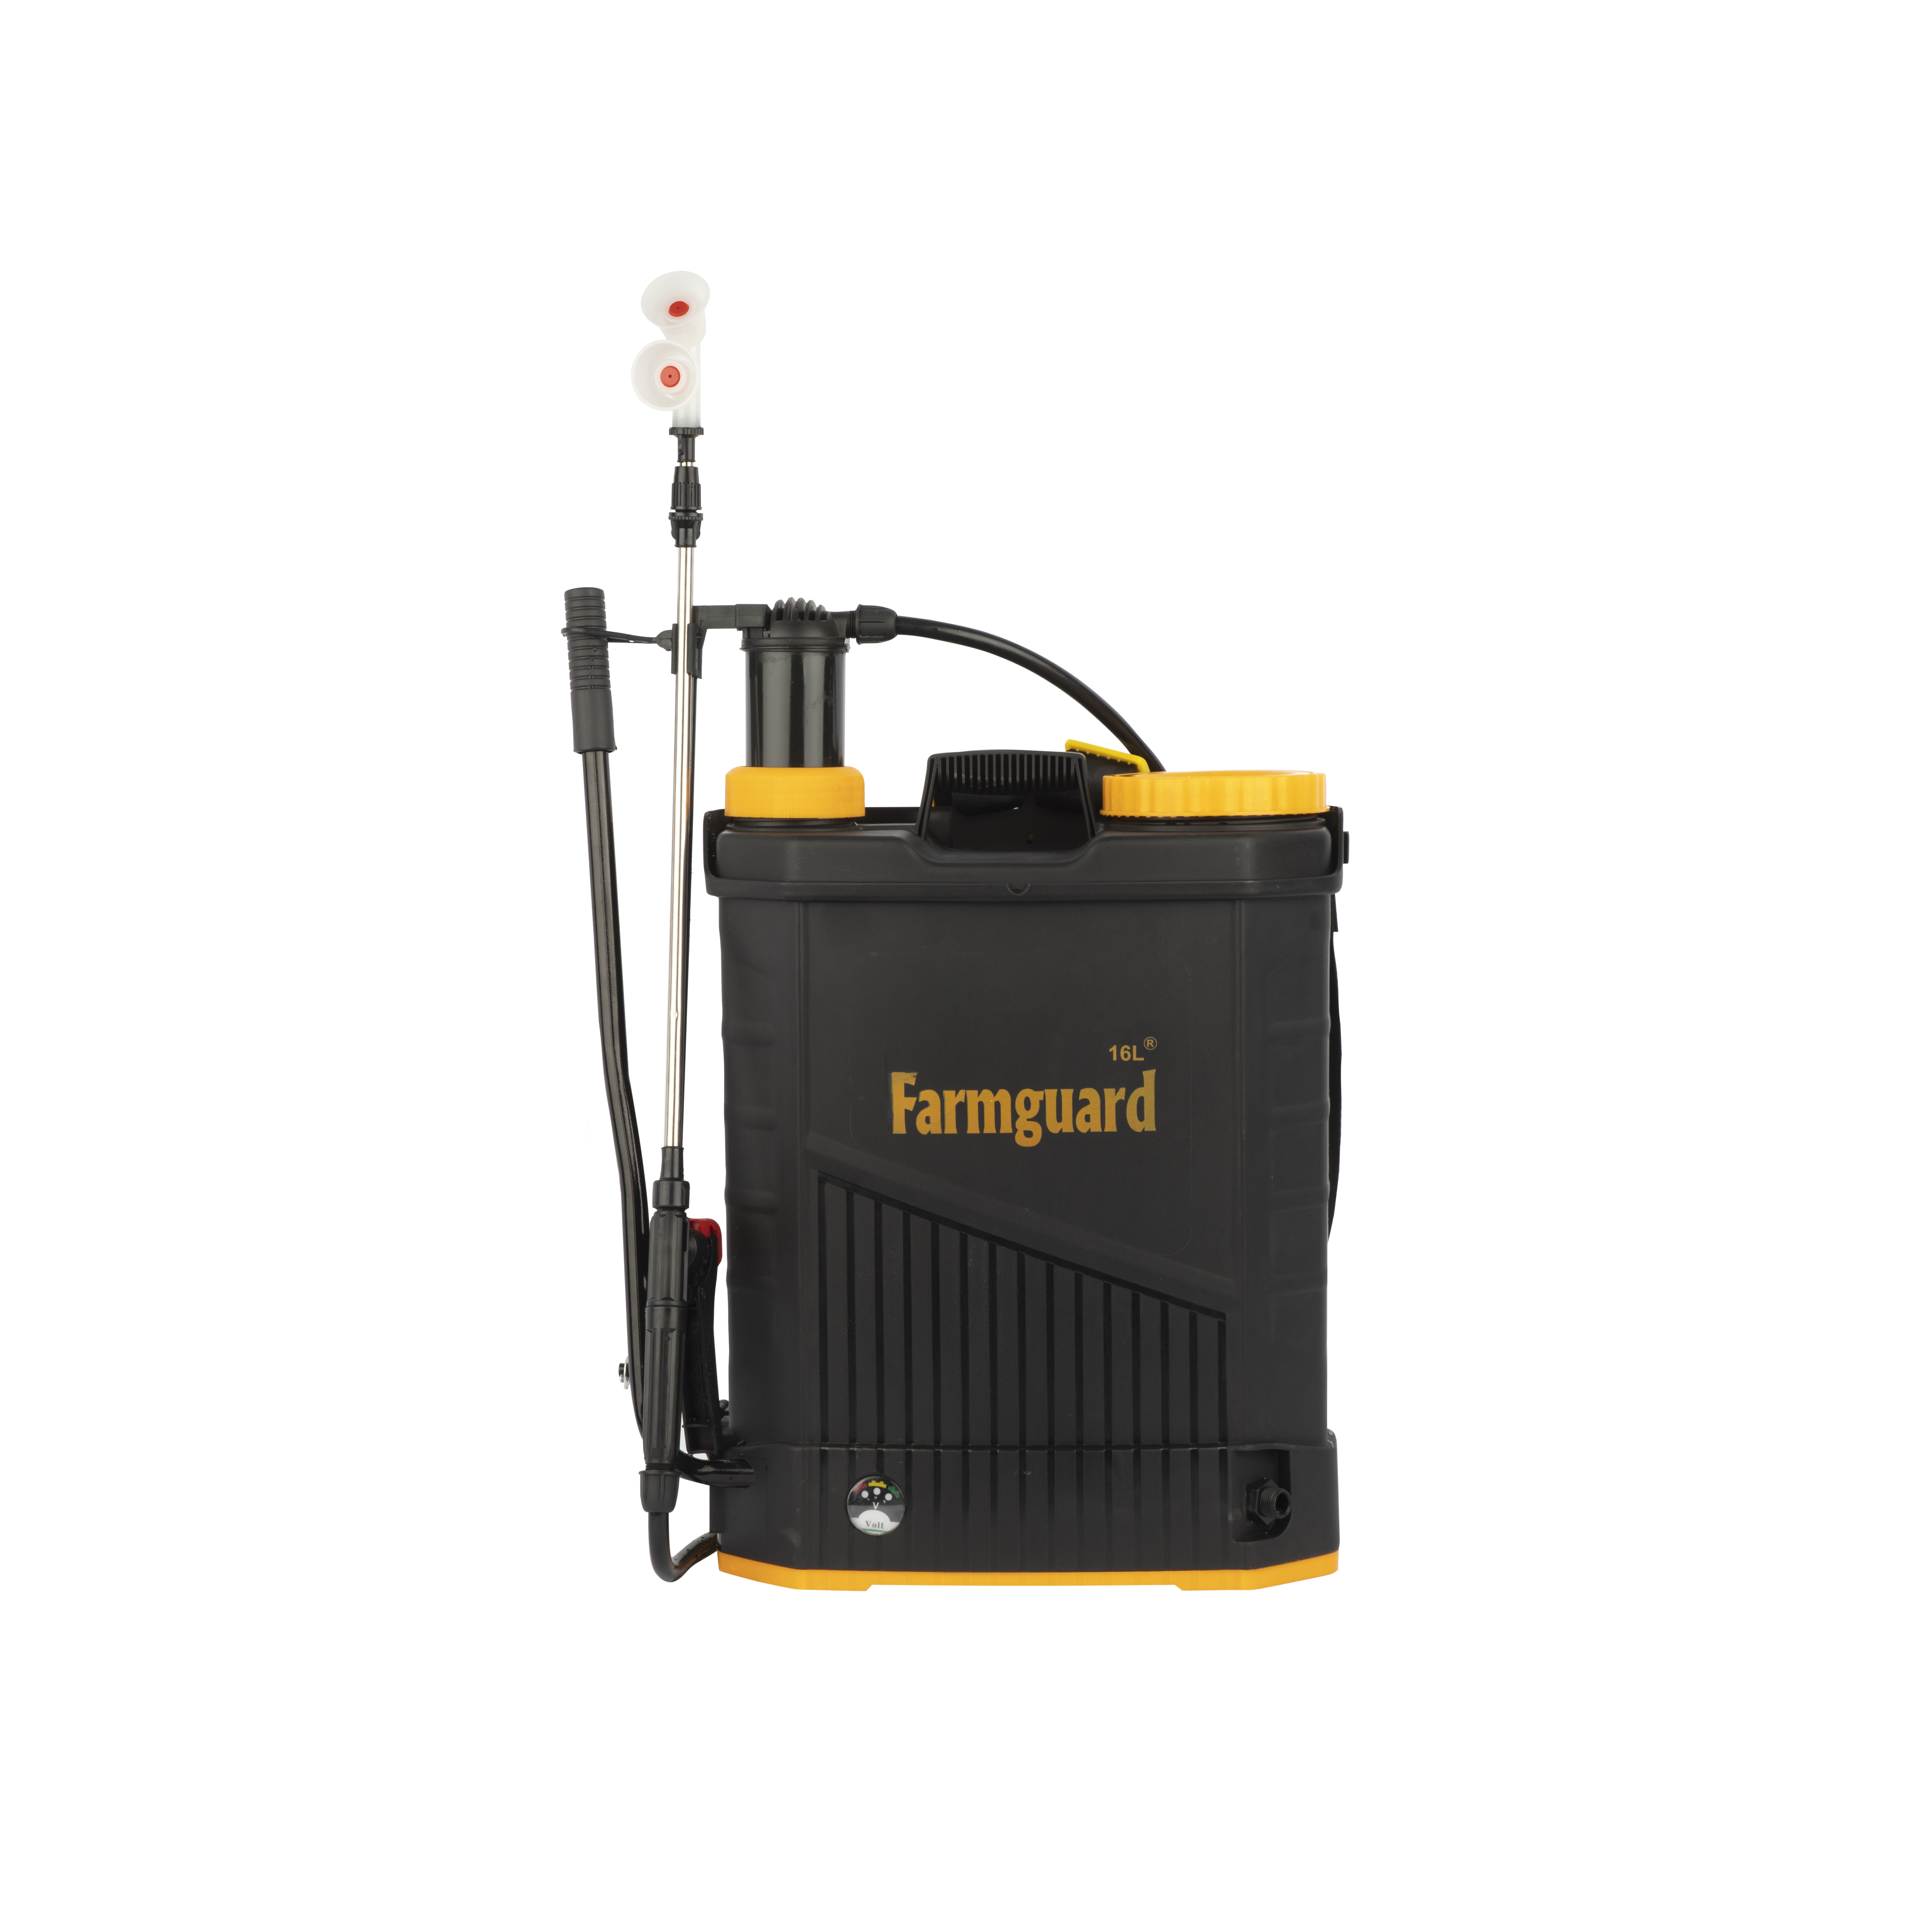 Taizhou Guangfeng Farm Good Quality 16L/18L/20L Agricultural Knapsack/Backpack Battery Electric Type Pump 2 In1 Power Sprayer